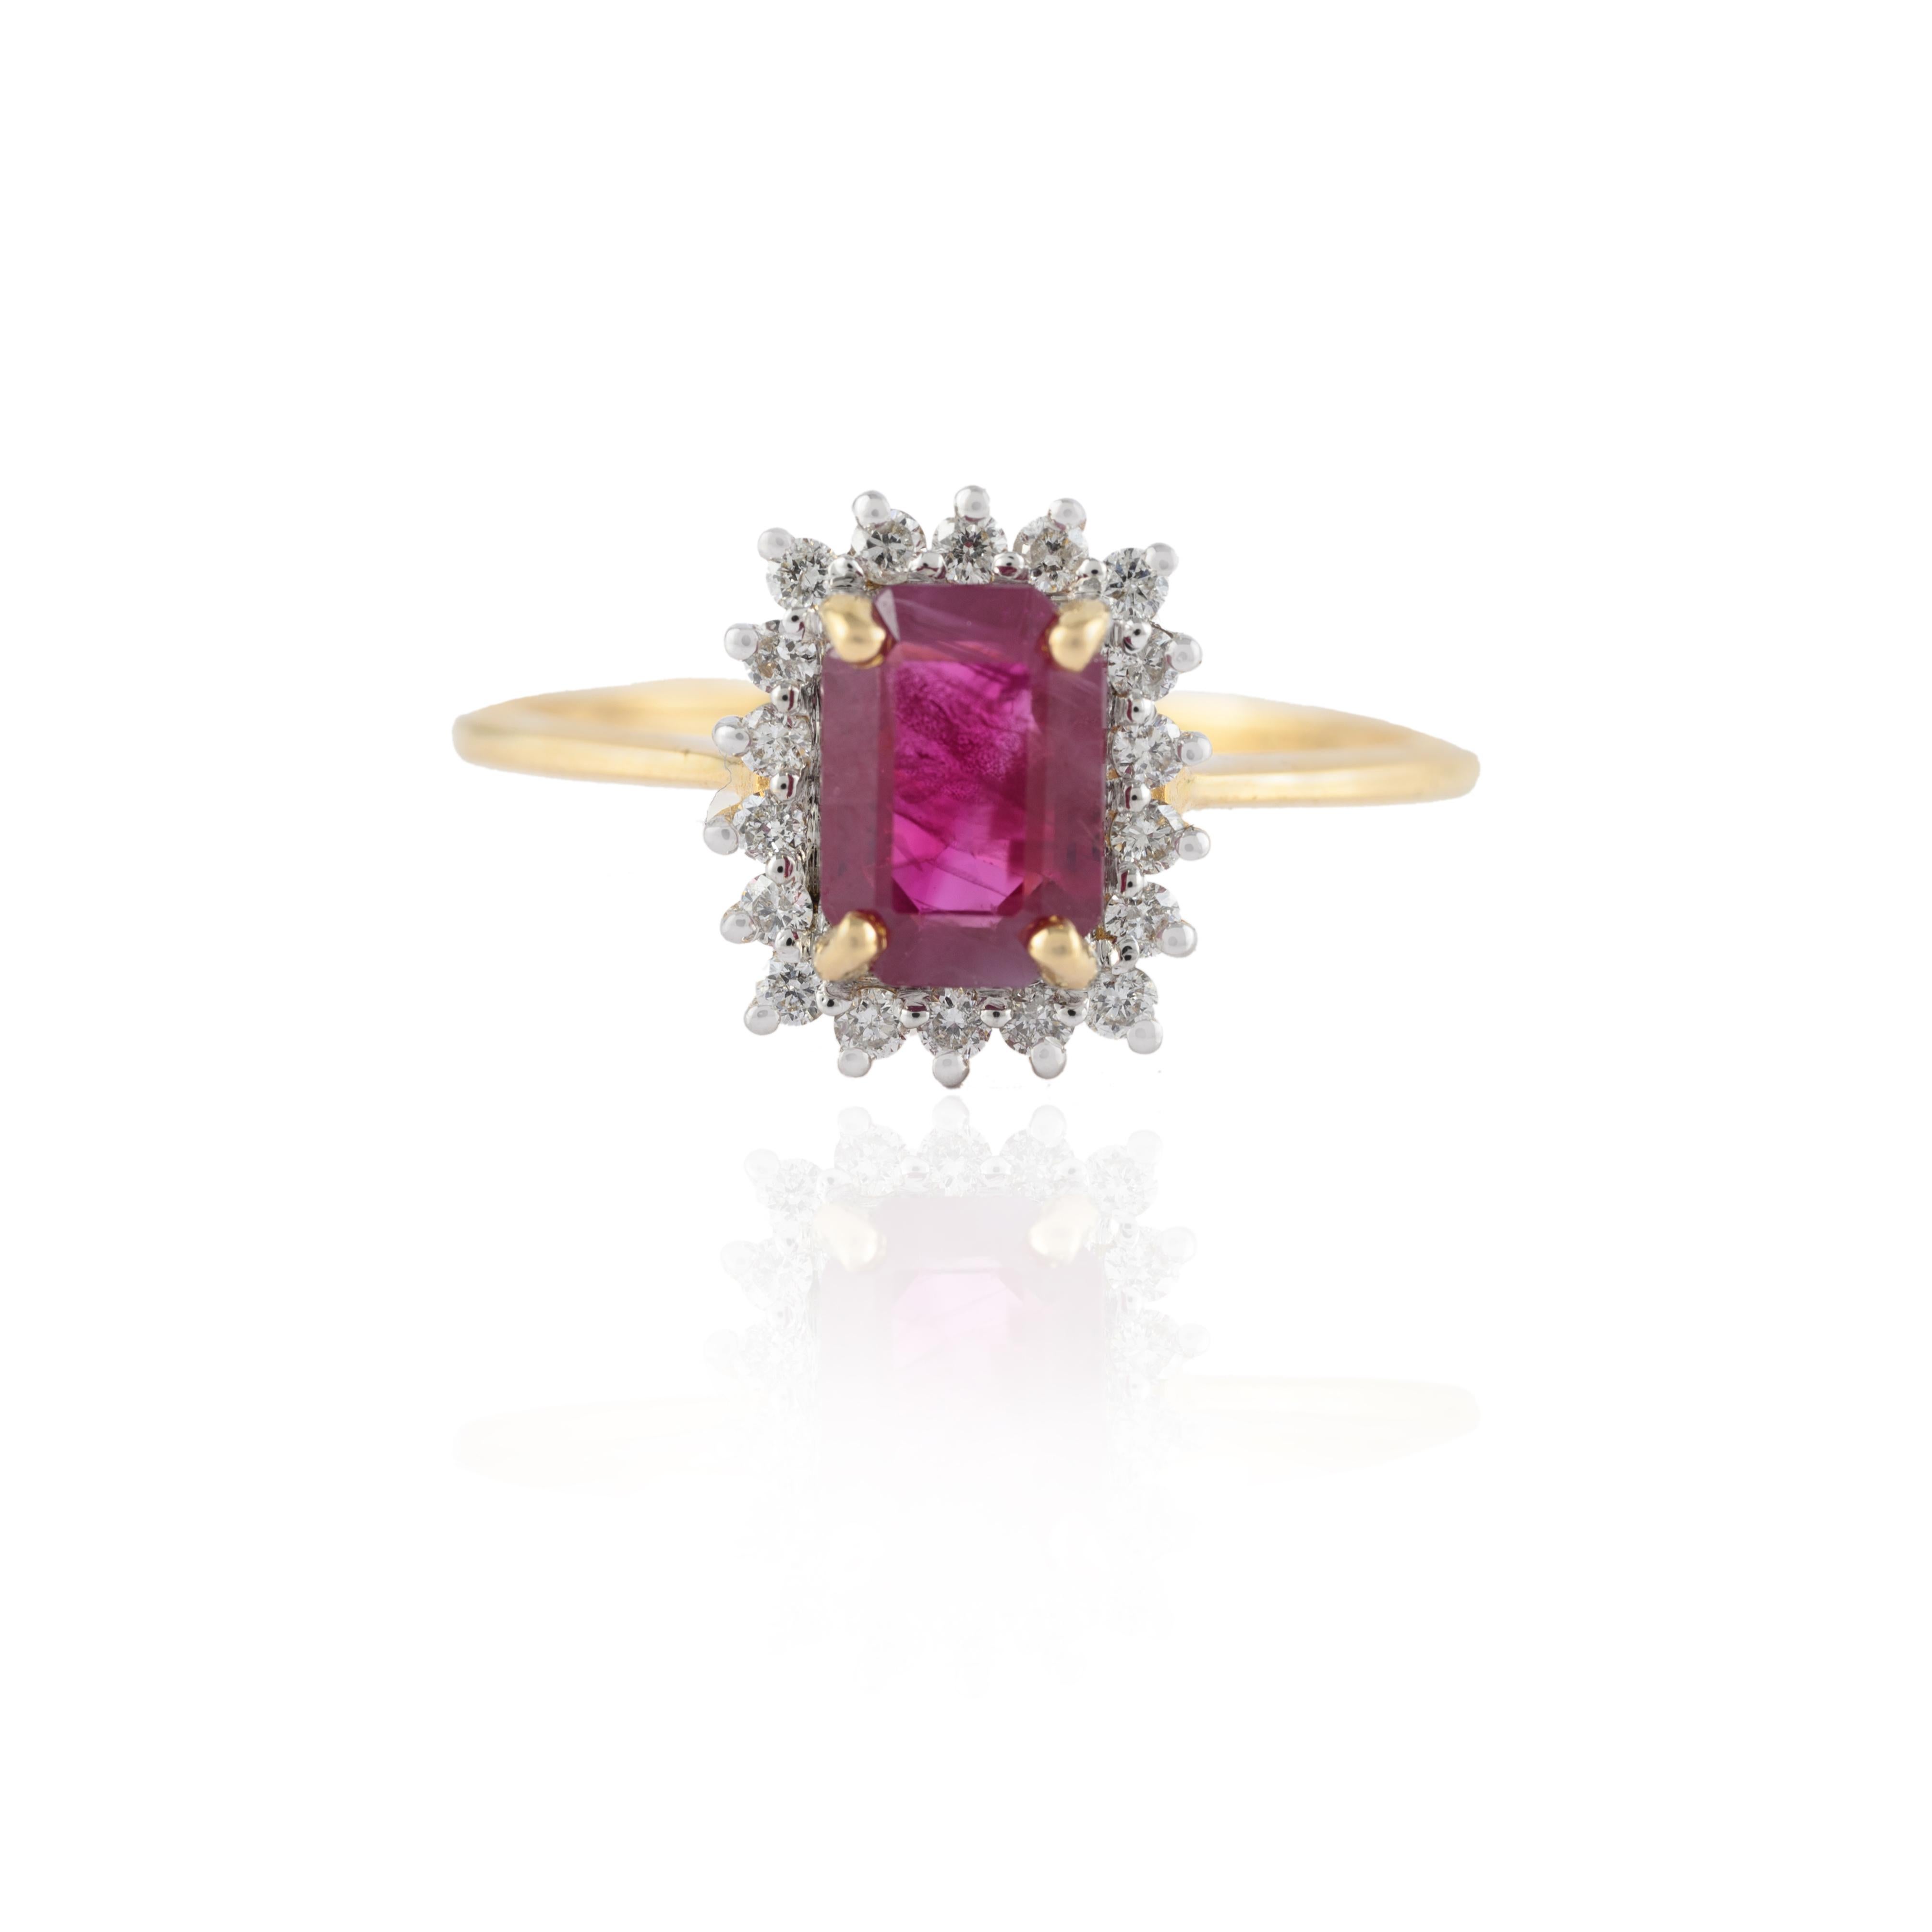 For Sale:  Genuine Octagon Cut Halo Diamond Ruby Ring in 14k Solid Yellow Gold 2